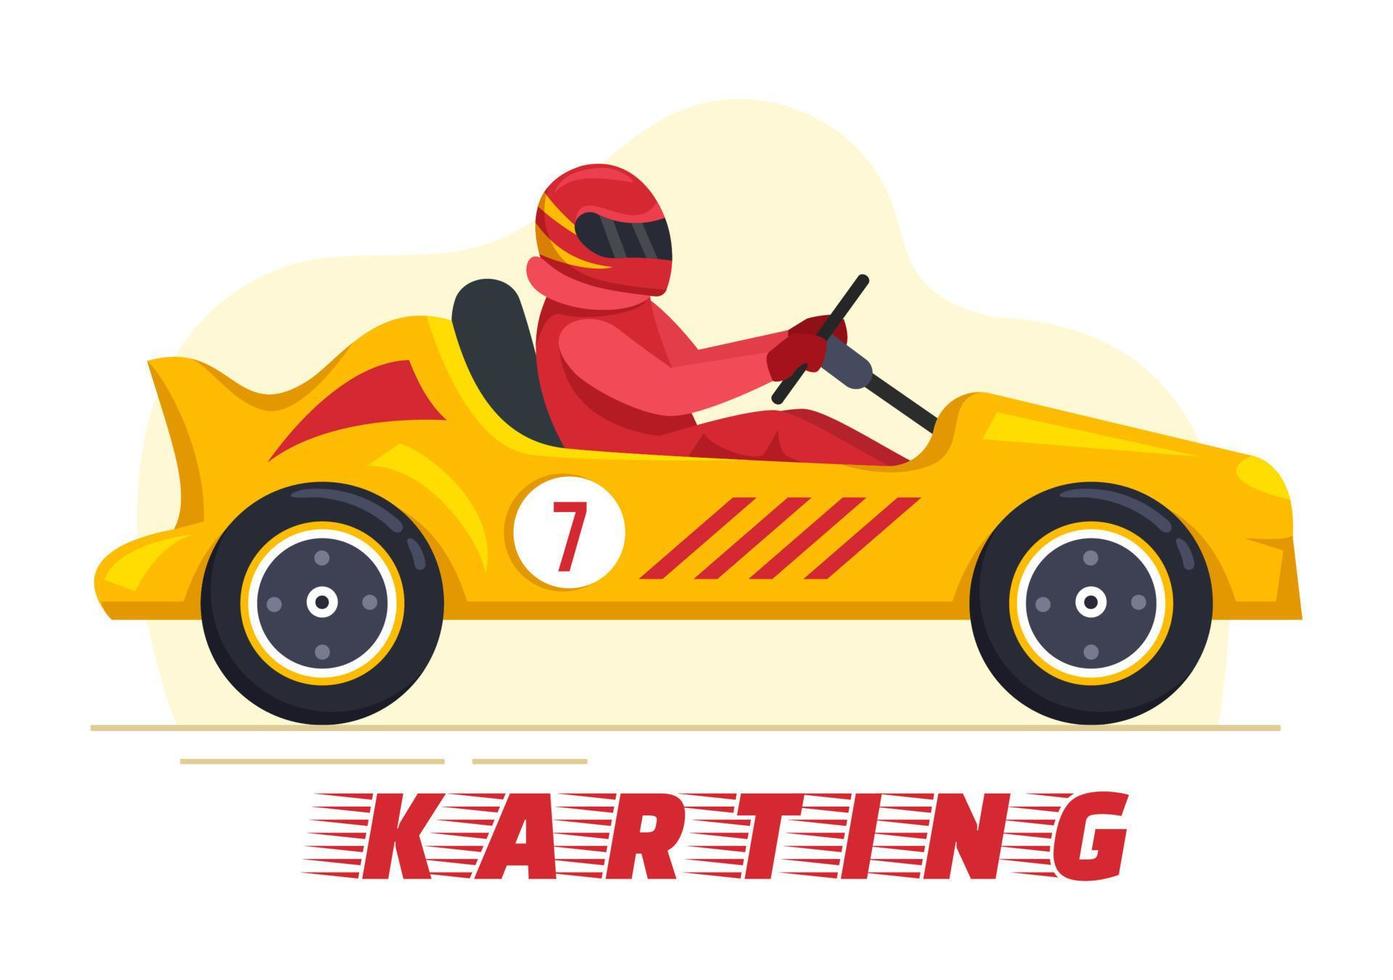 Karting Sport with Racing Game Go Kart or Mini Car on Small Circuit Track in Flat Cartoon Hand Drawn Template Illustration vector